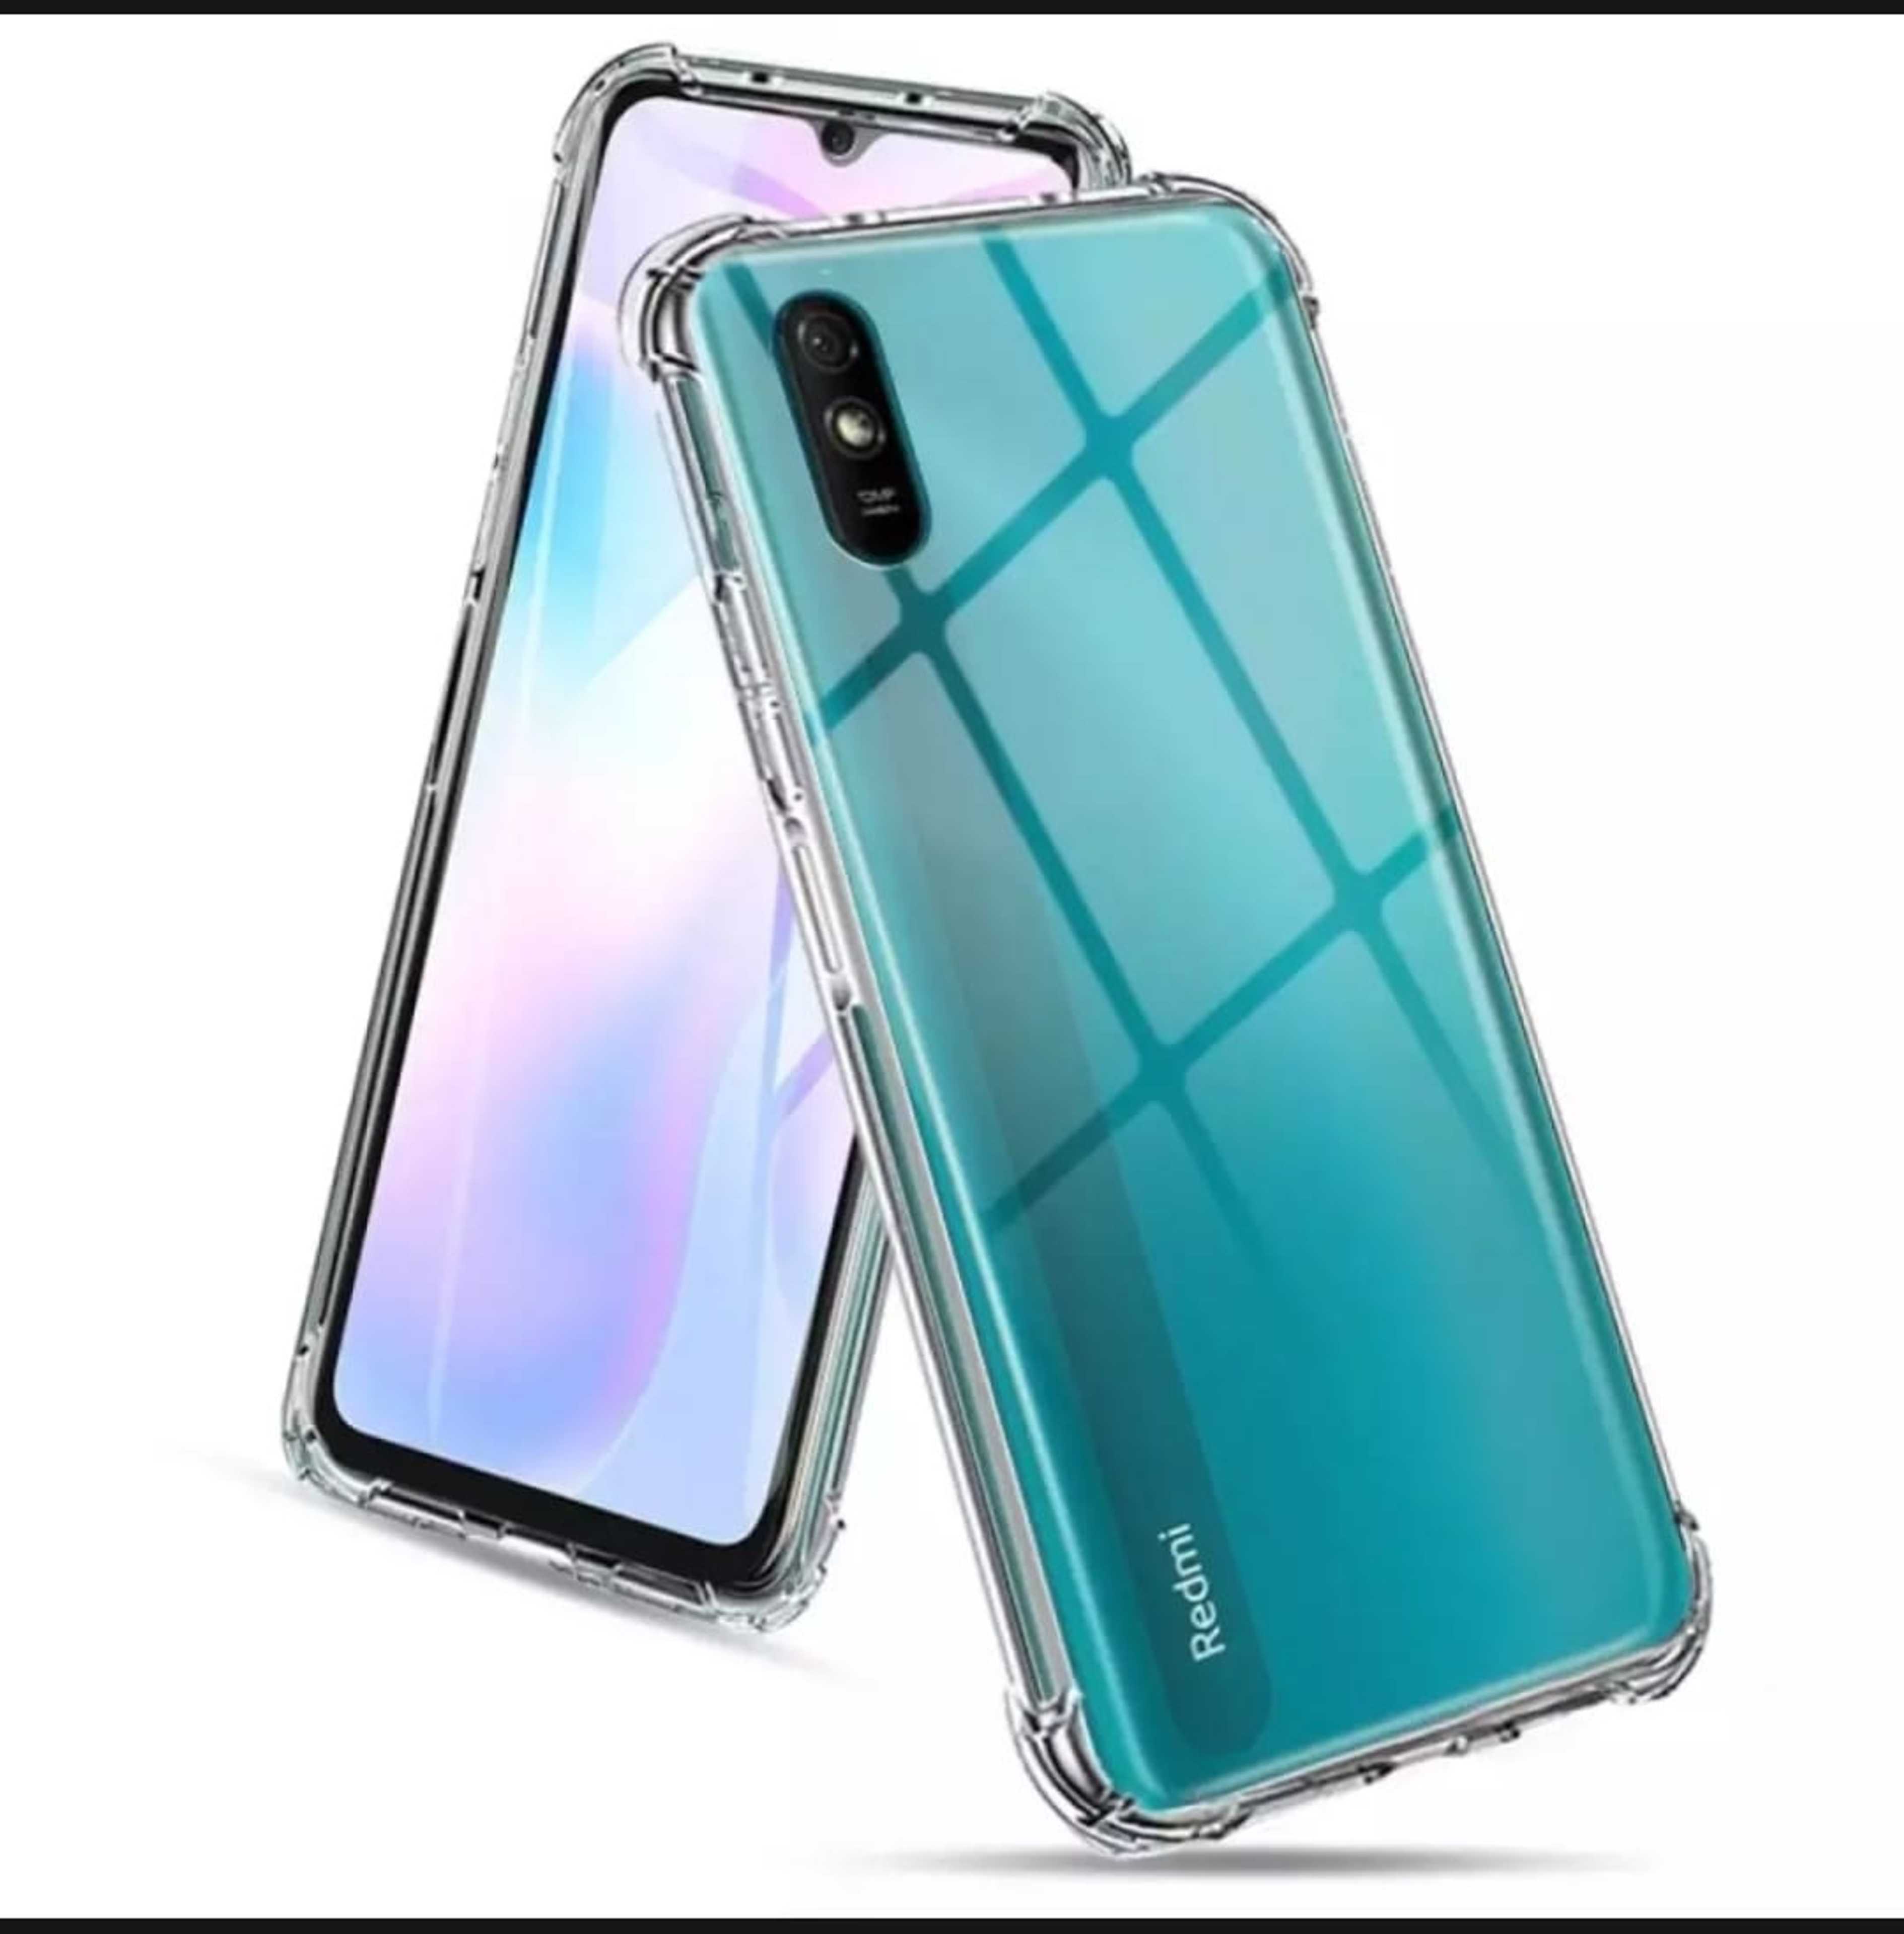 101% Pure 1.5MM Redmi 9A Antishock 4 Corner airbag Transparent Bumper pouch,. Top Quality[ Must Watch Upper Video to understand the best Quality]